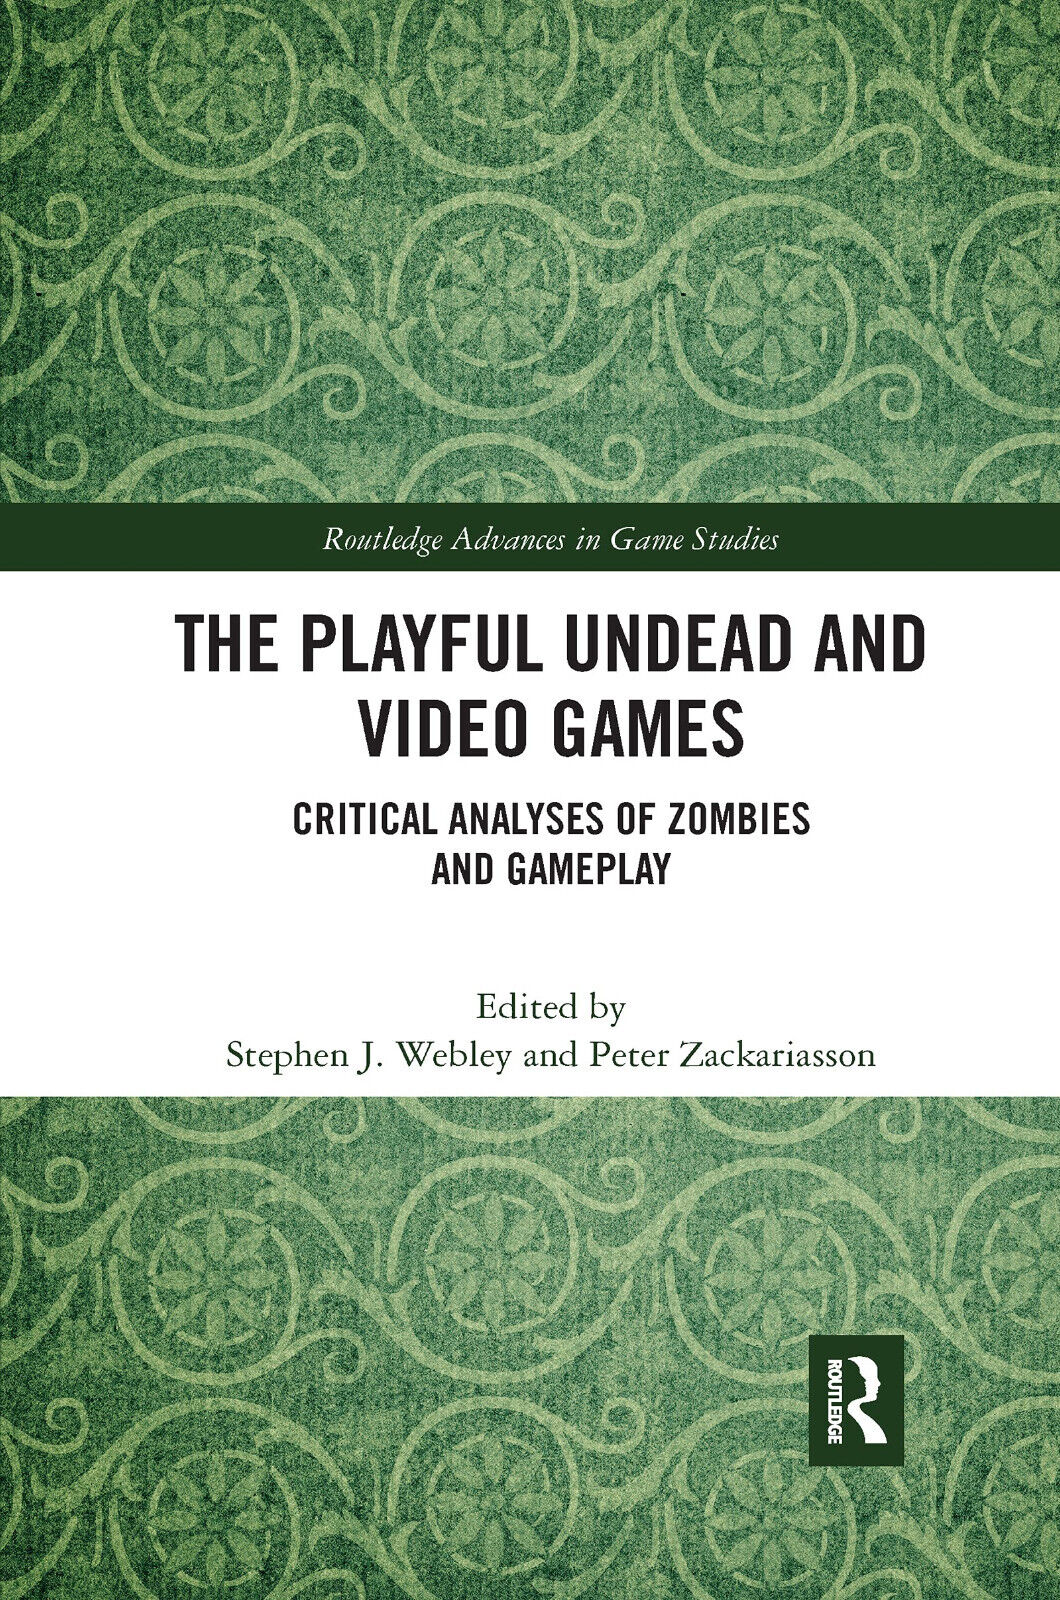 The Playful Undead And Video Games - Stephen J. Webley  - Routledge, 2021 libro usato